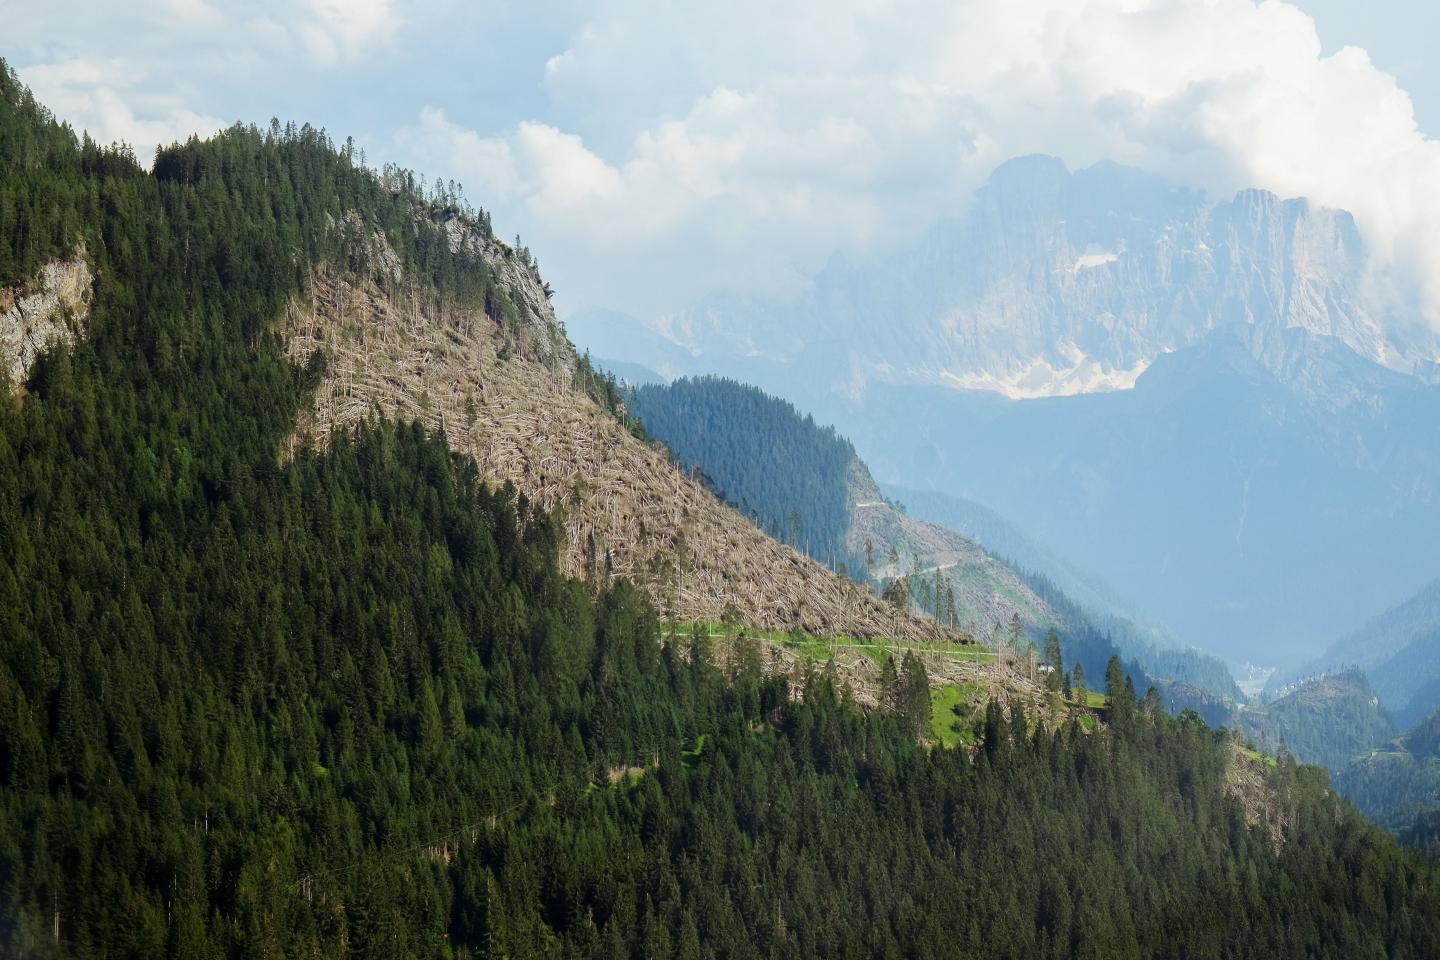 Windfall in the Dolomites in 2018